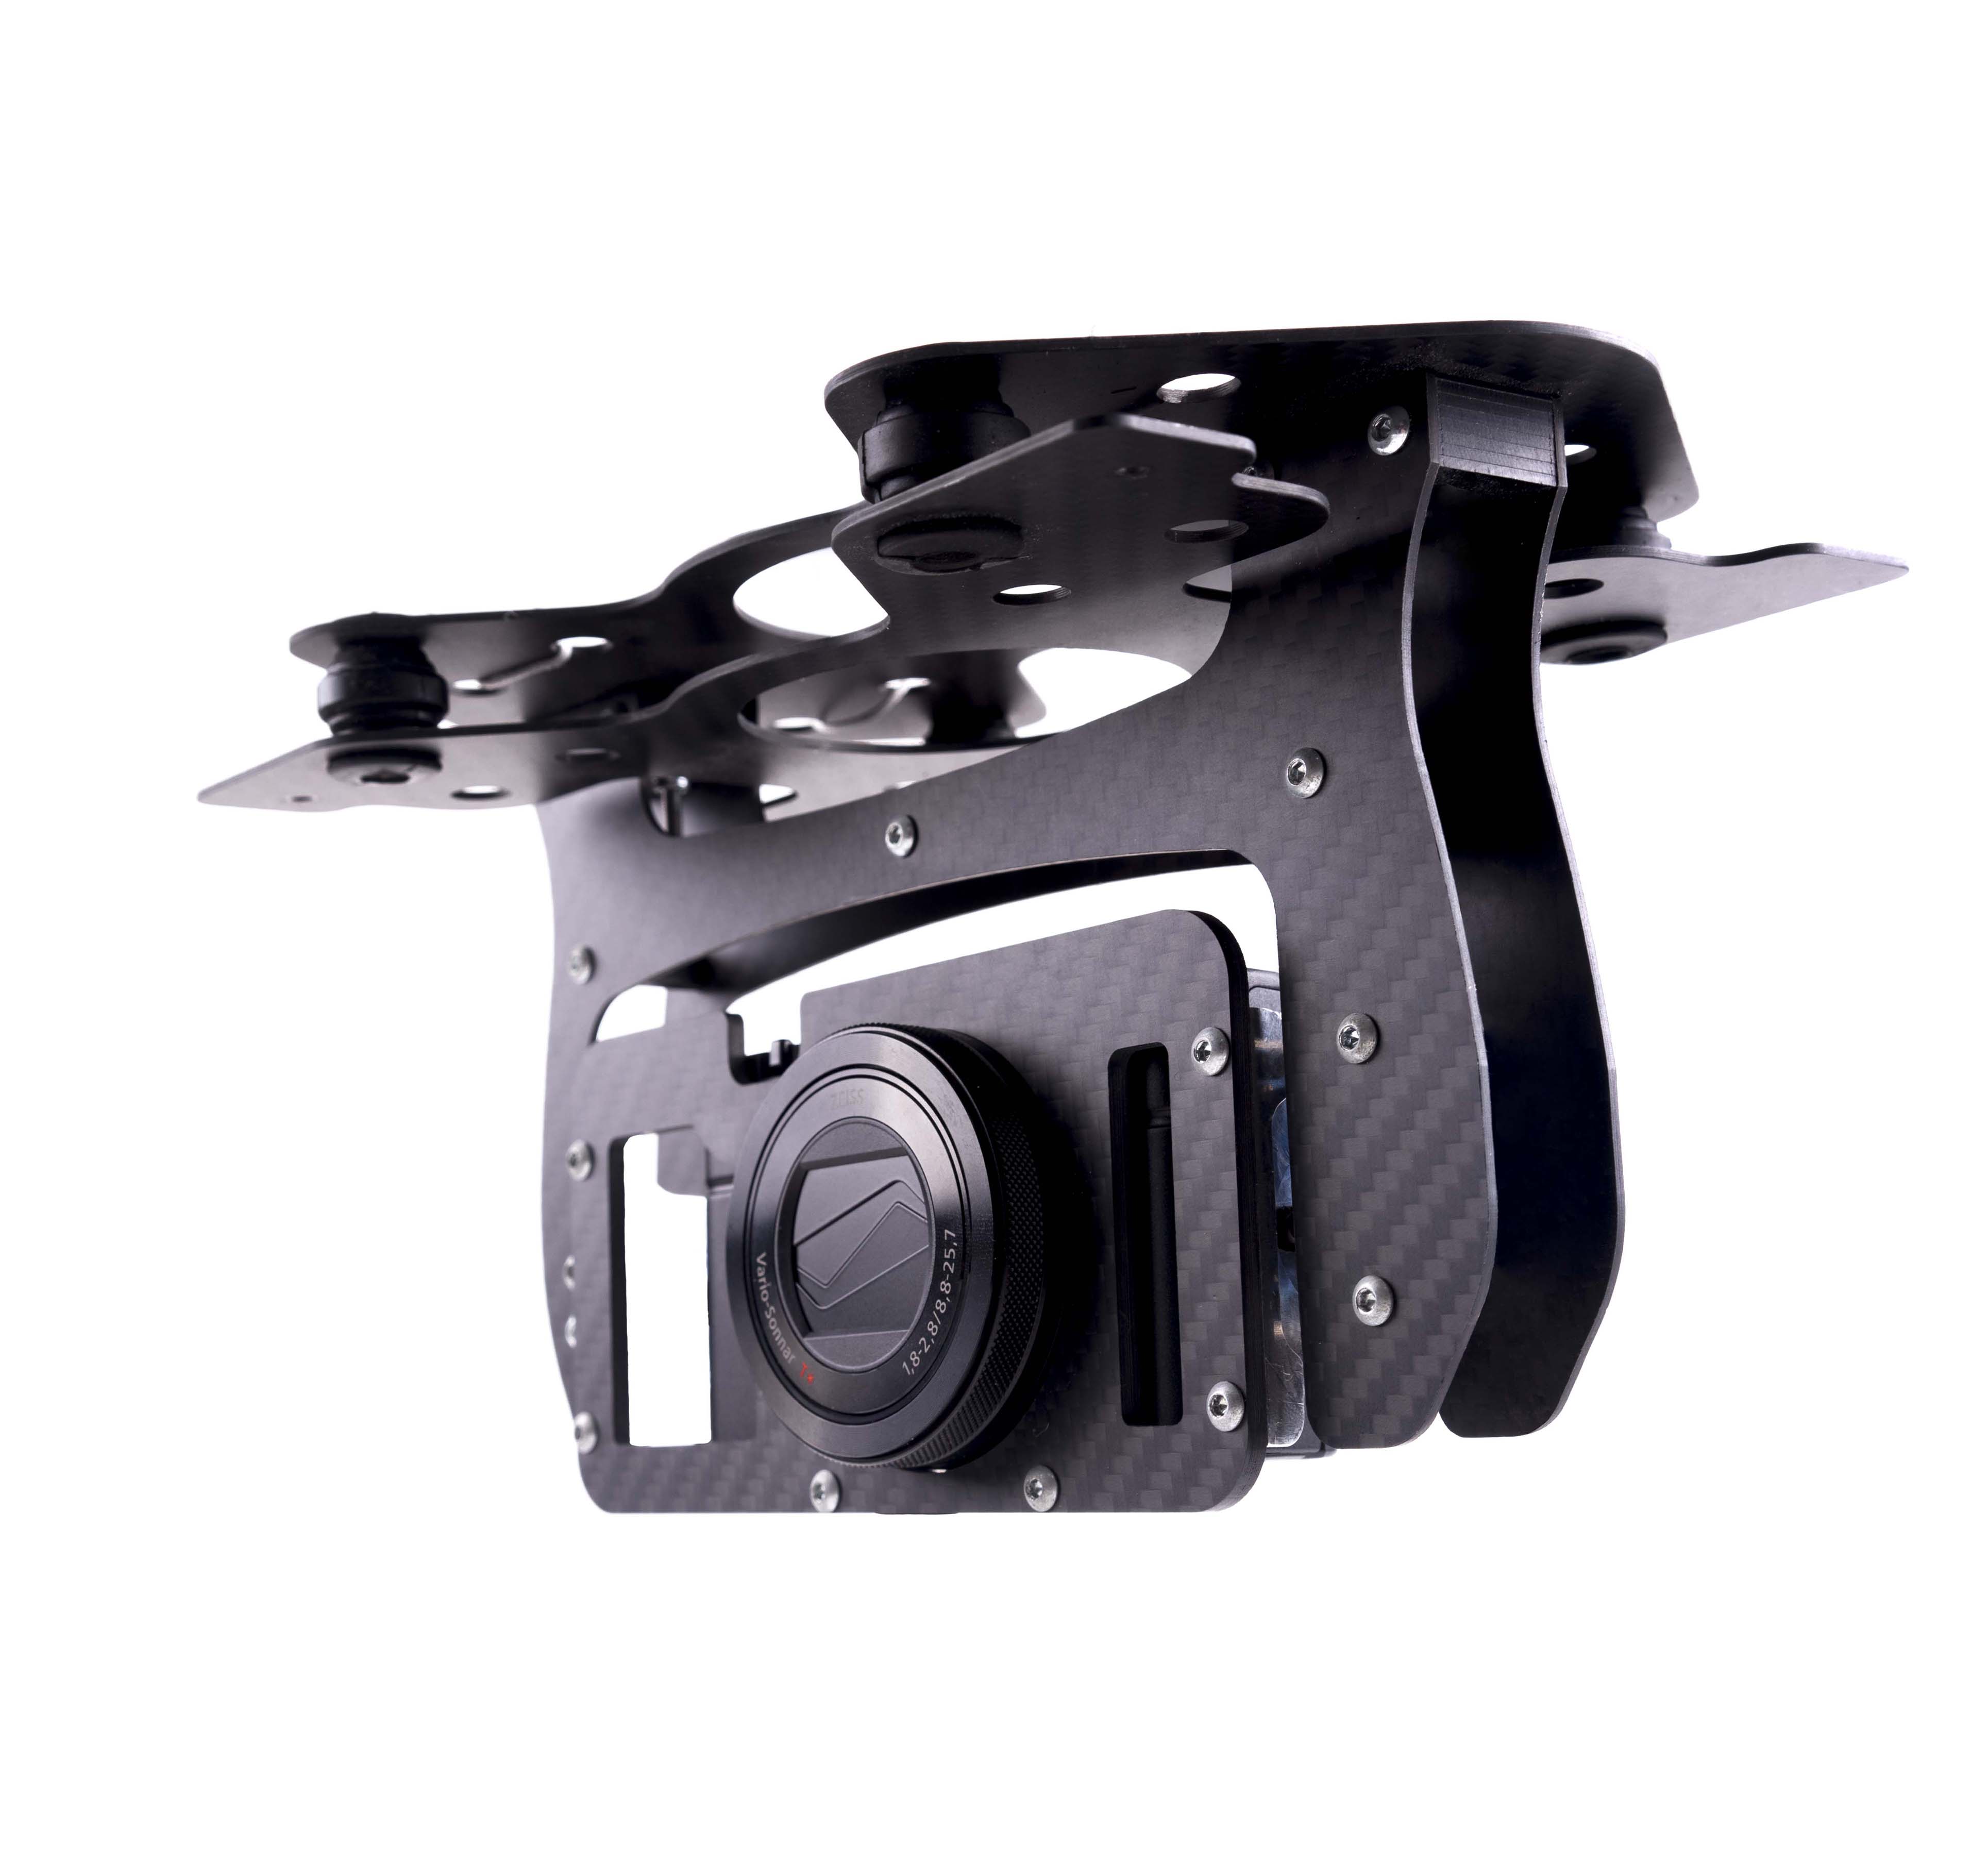 optimized gimbal for professional drone